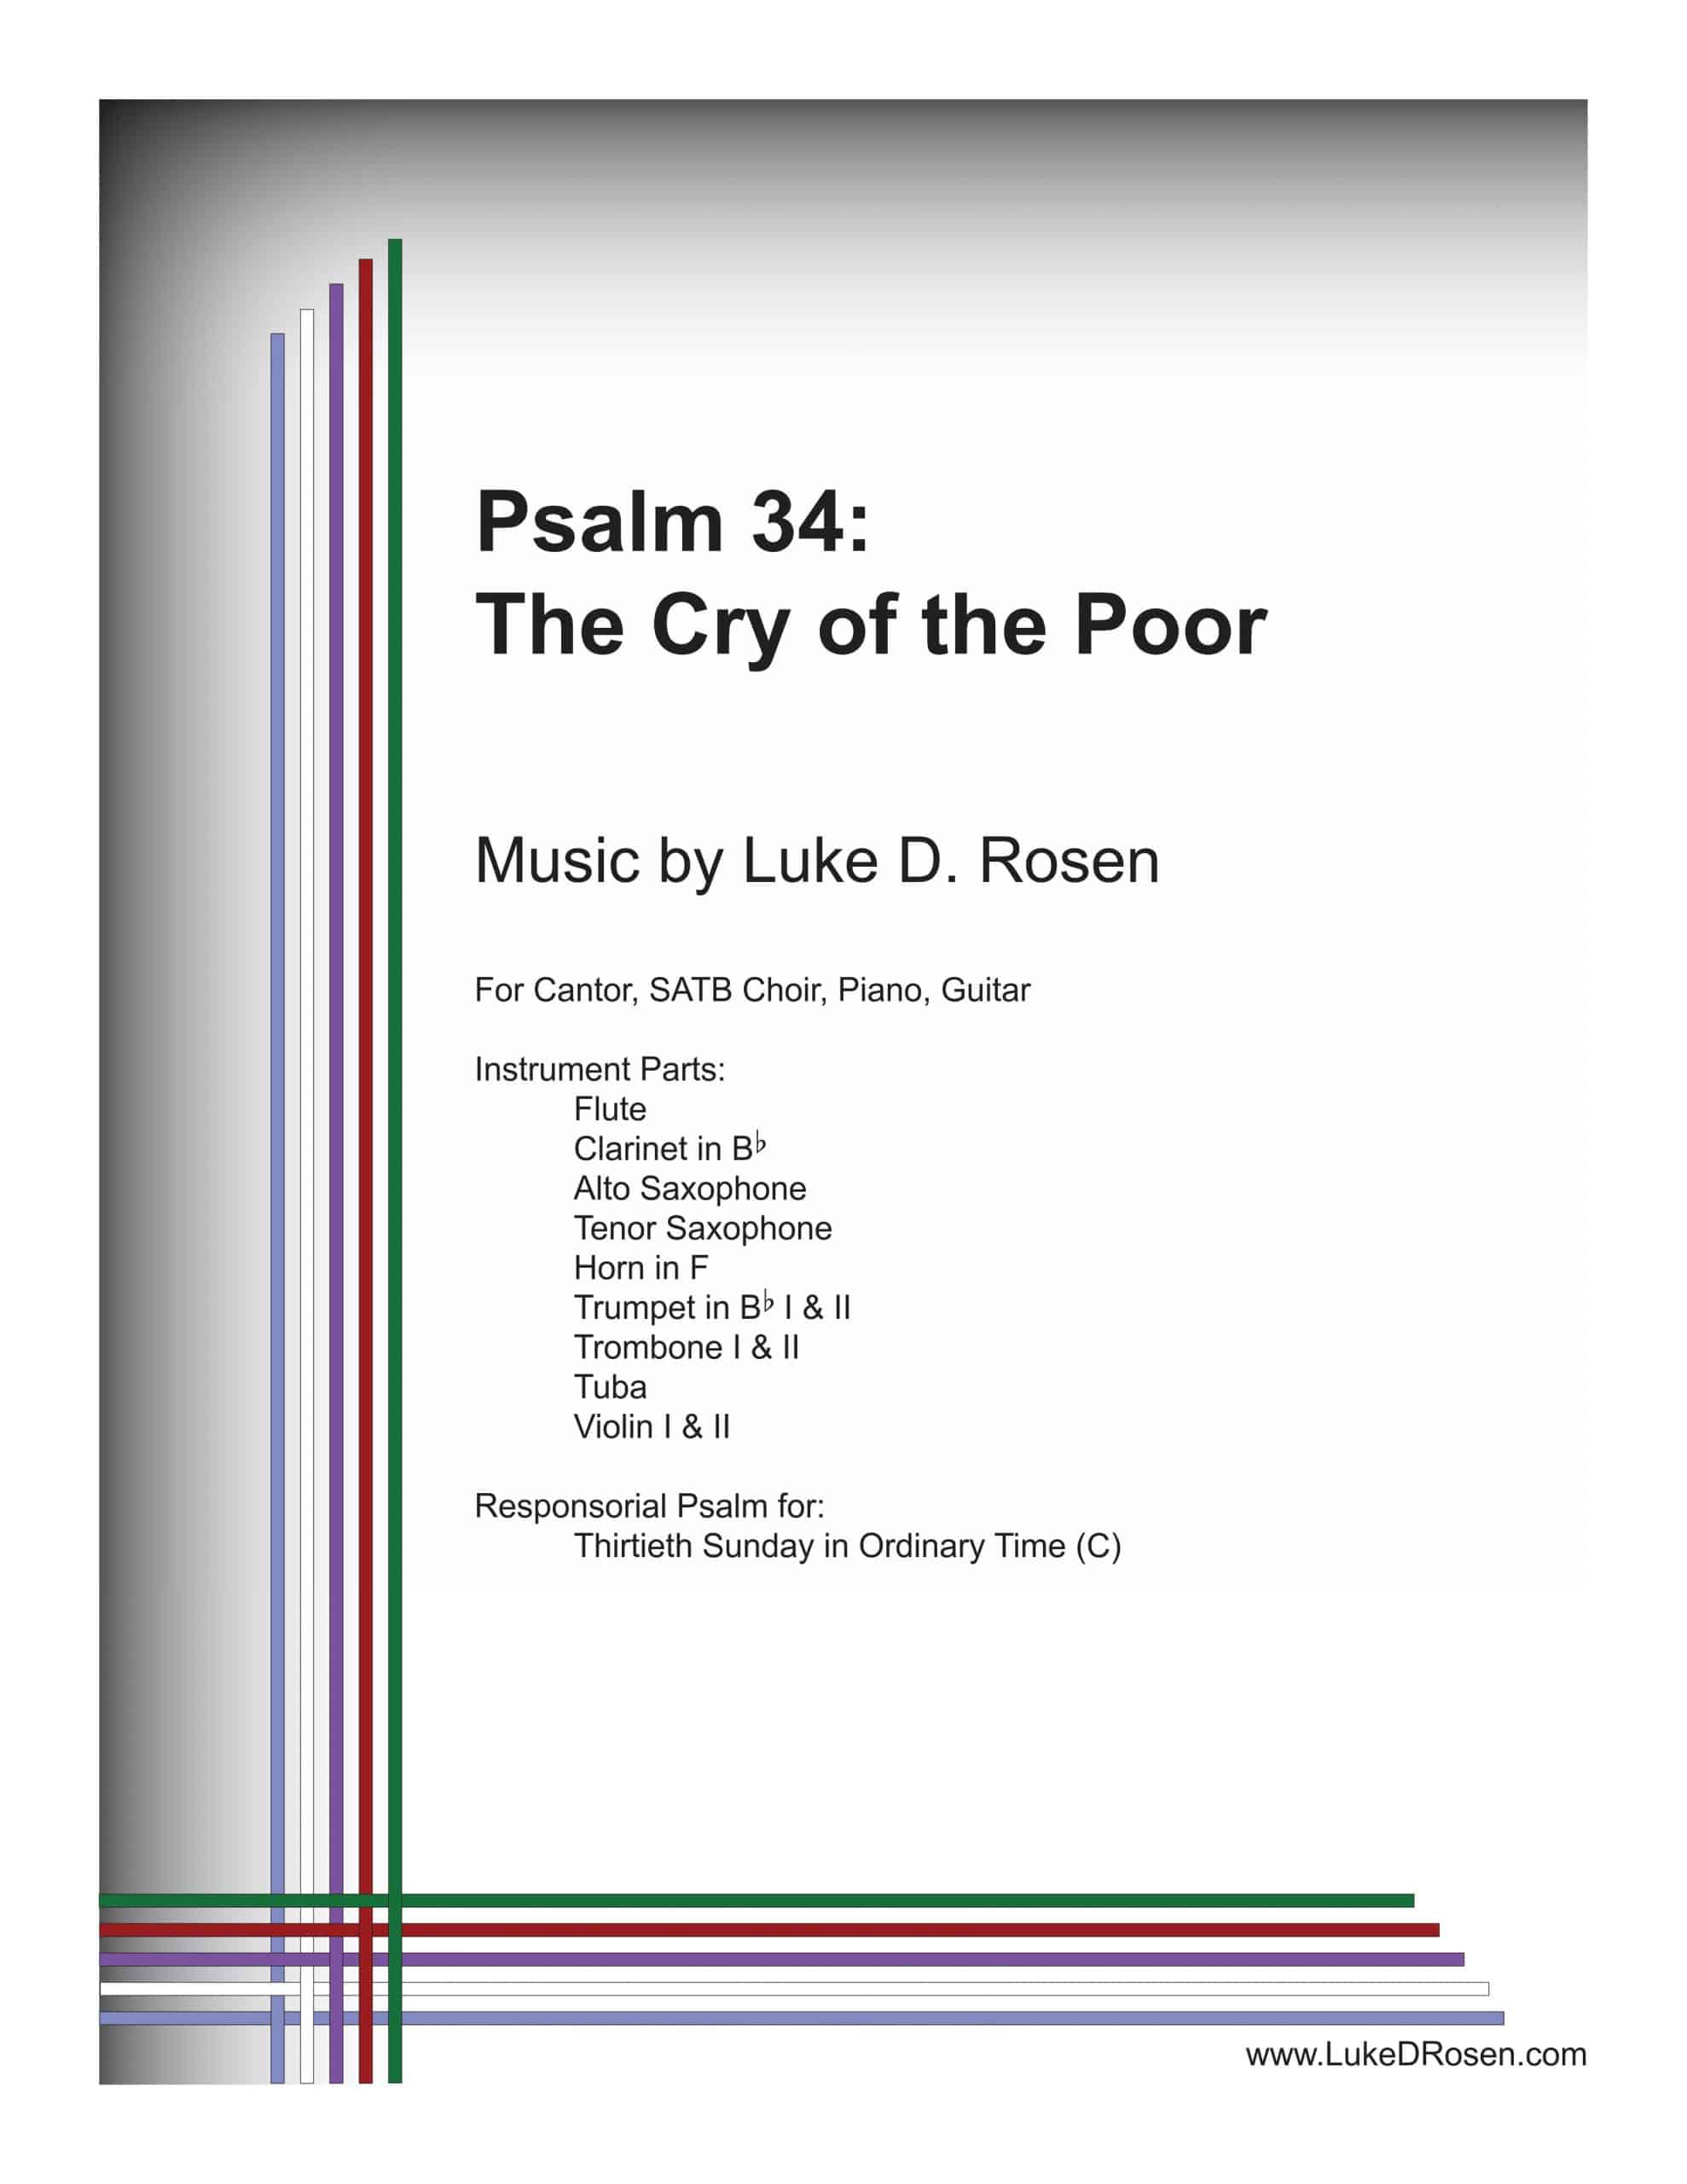 Psalm 34 – The Cry of the Poor (Rosen)